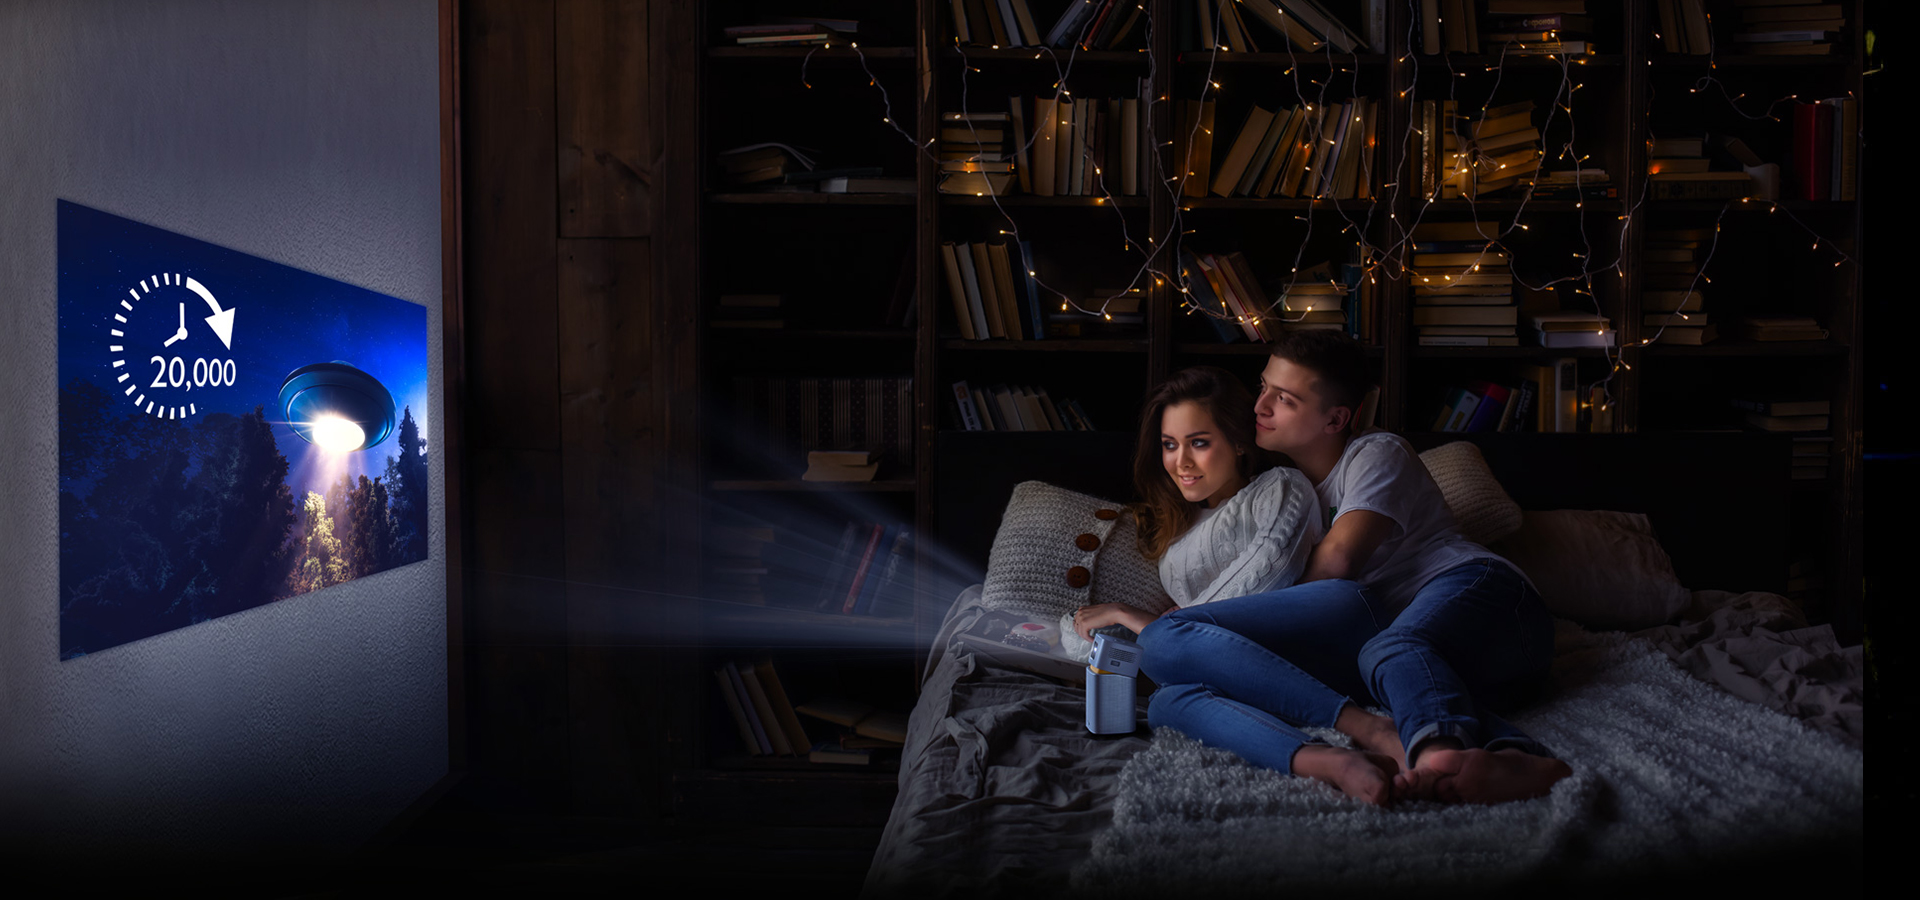 A couple uses portable projector for movie-watching in a bedroom